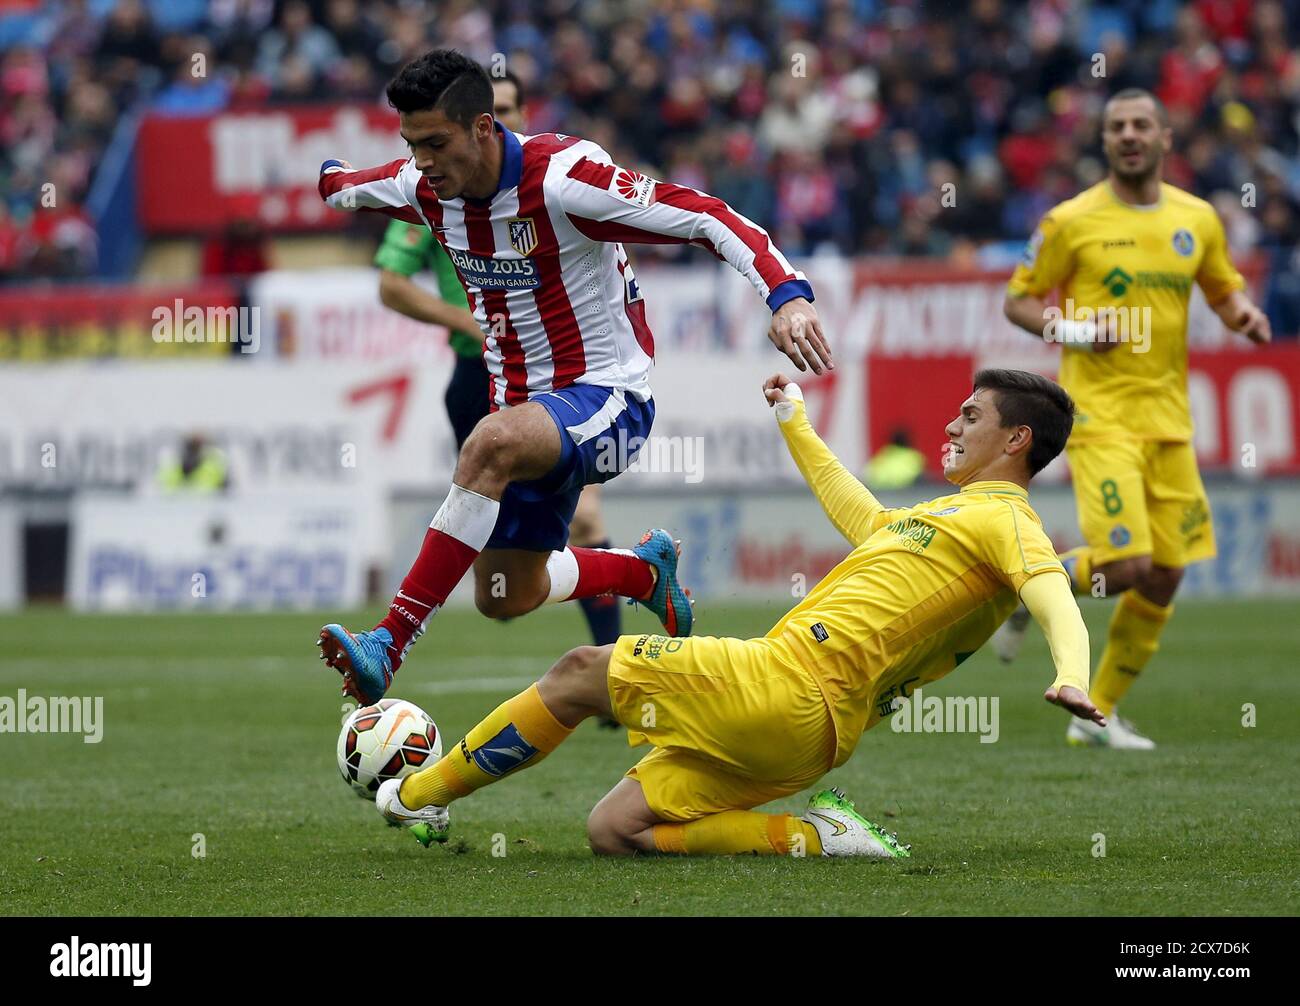 Atletico Madrid's Raul Jimenez (L) and Getafe's Emiliano Velazquez fight  for the ball during their Spanish